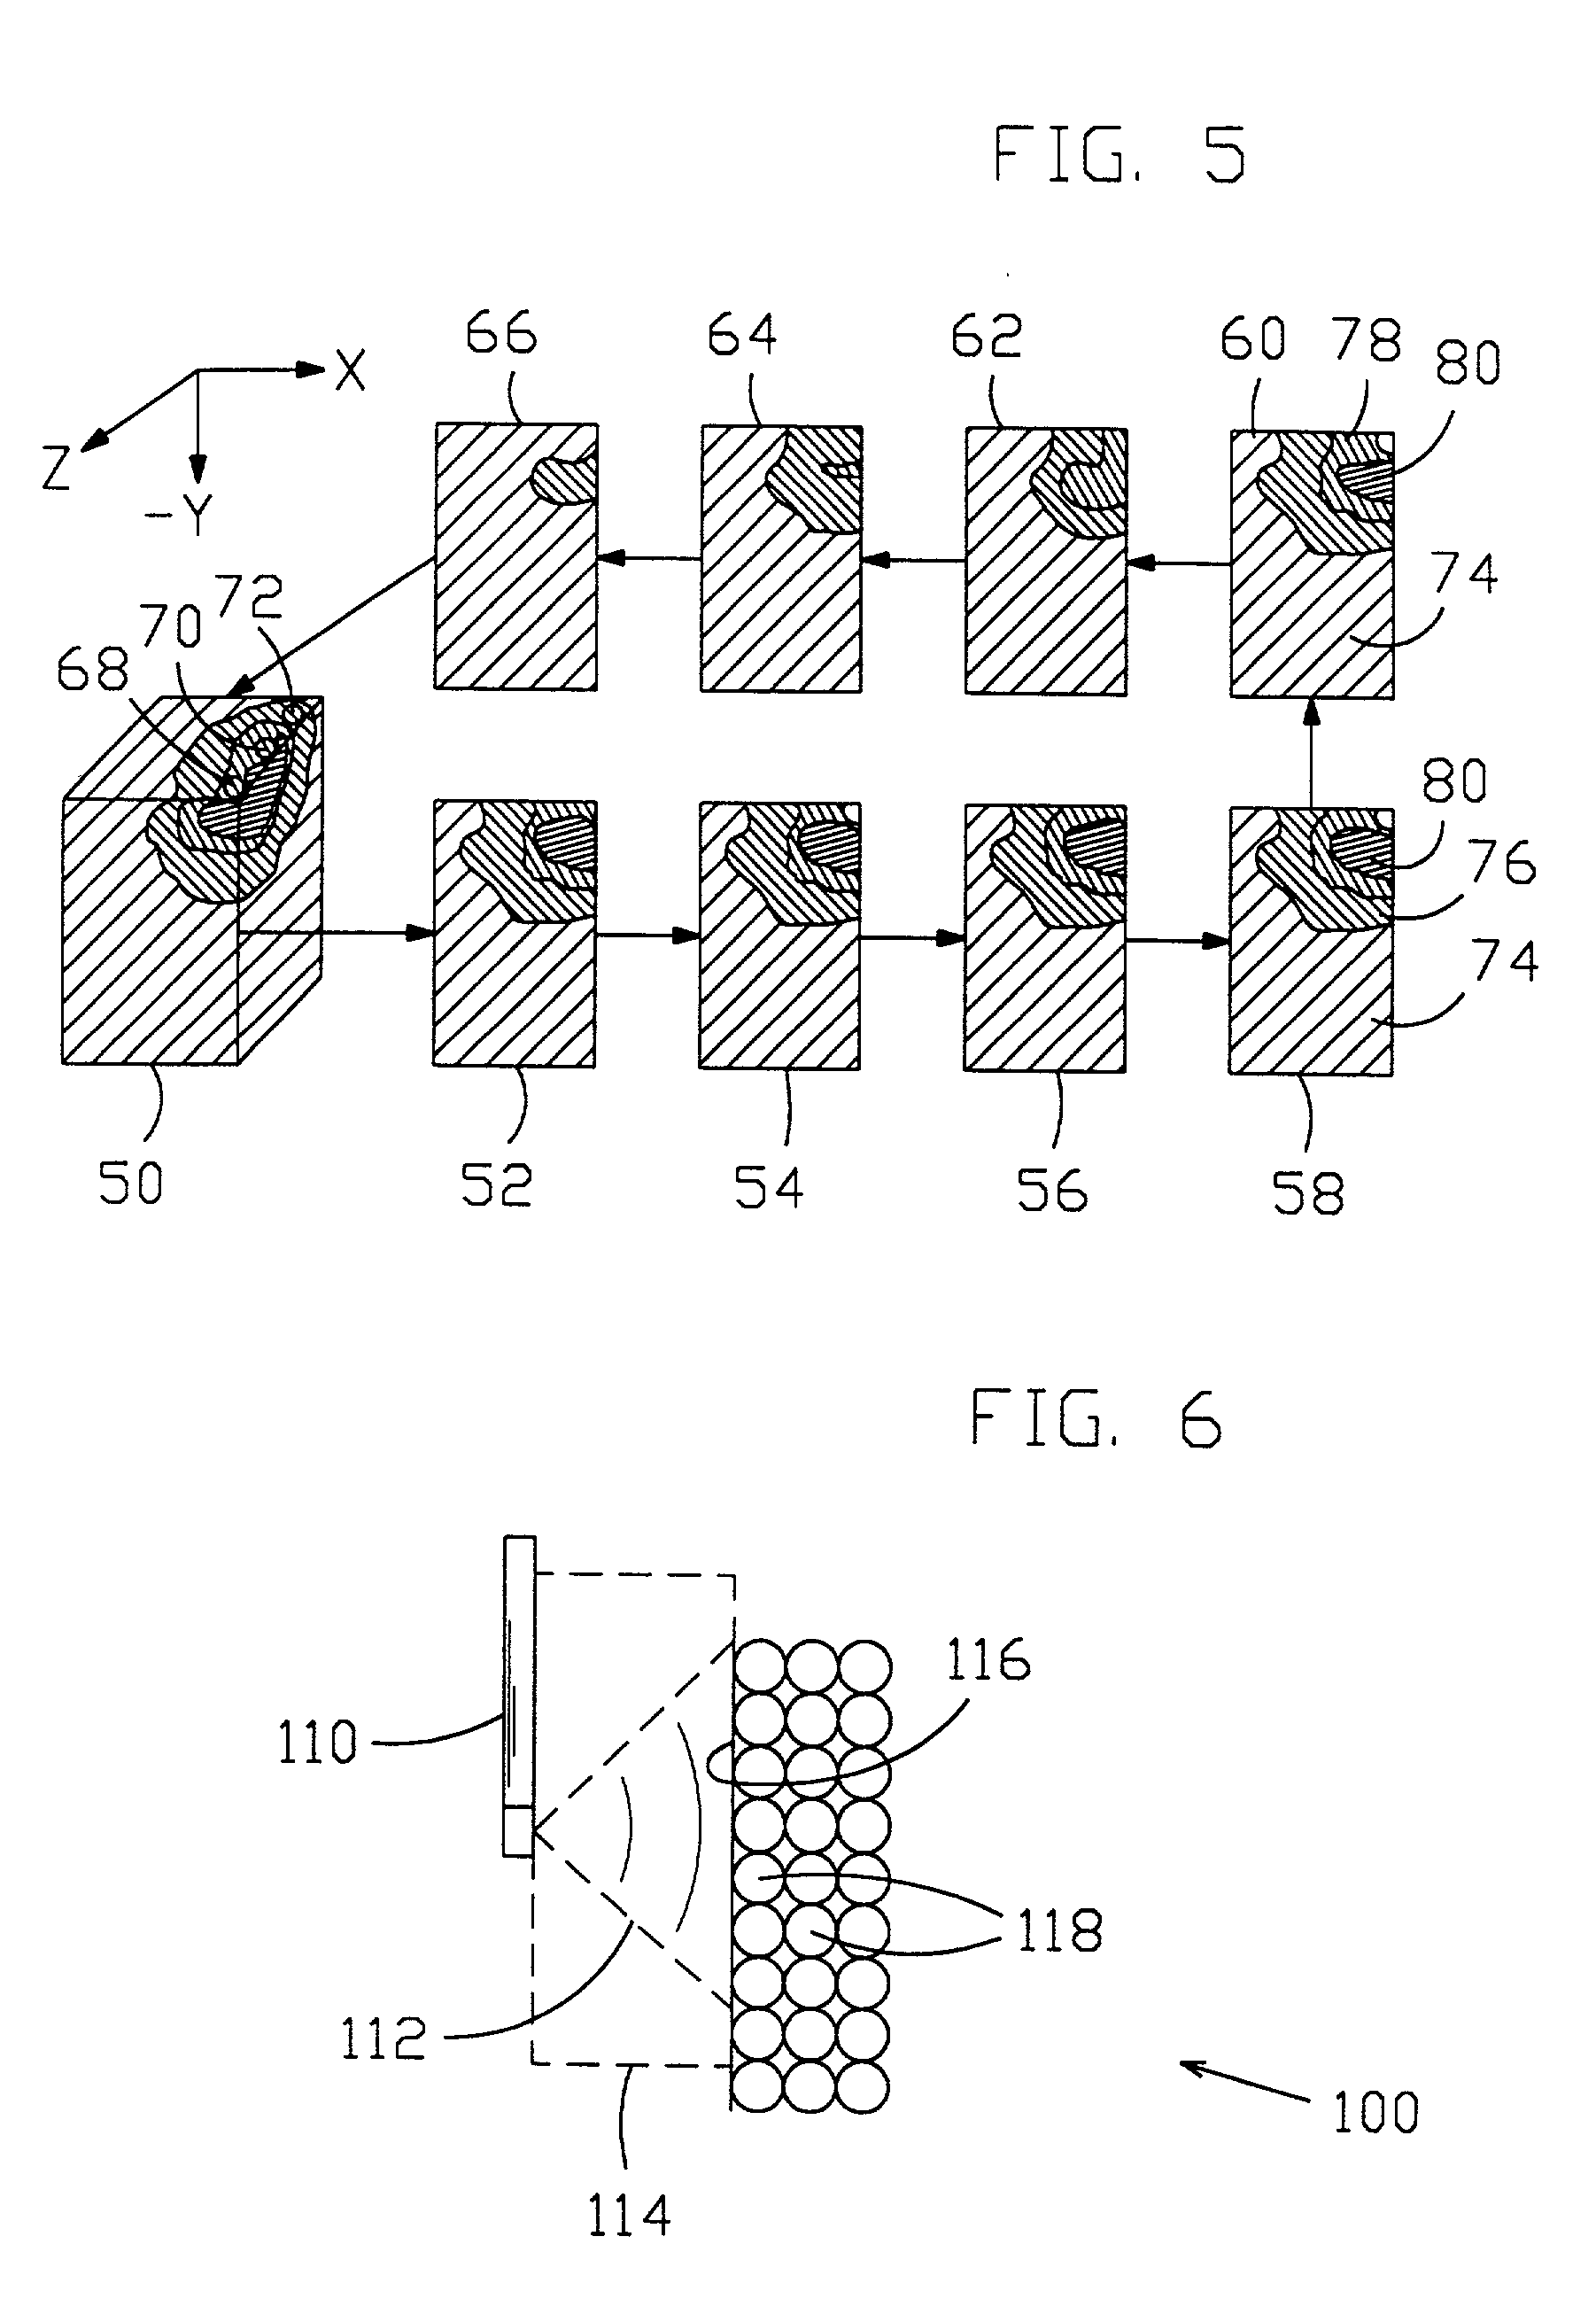 Method of constructing a microwave antenna